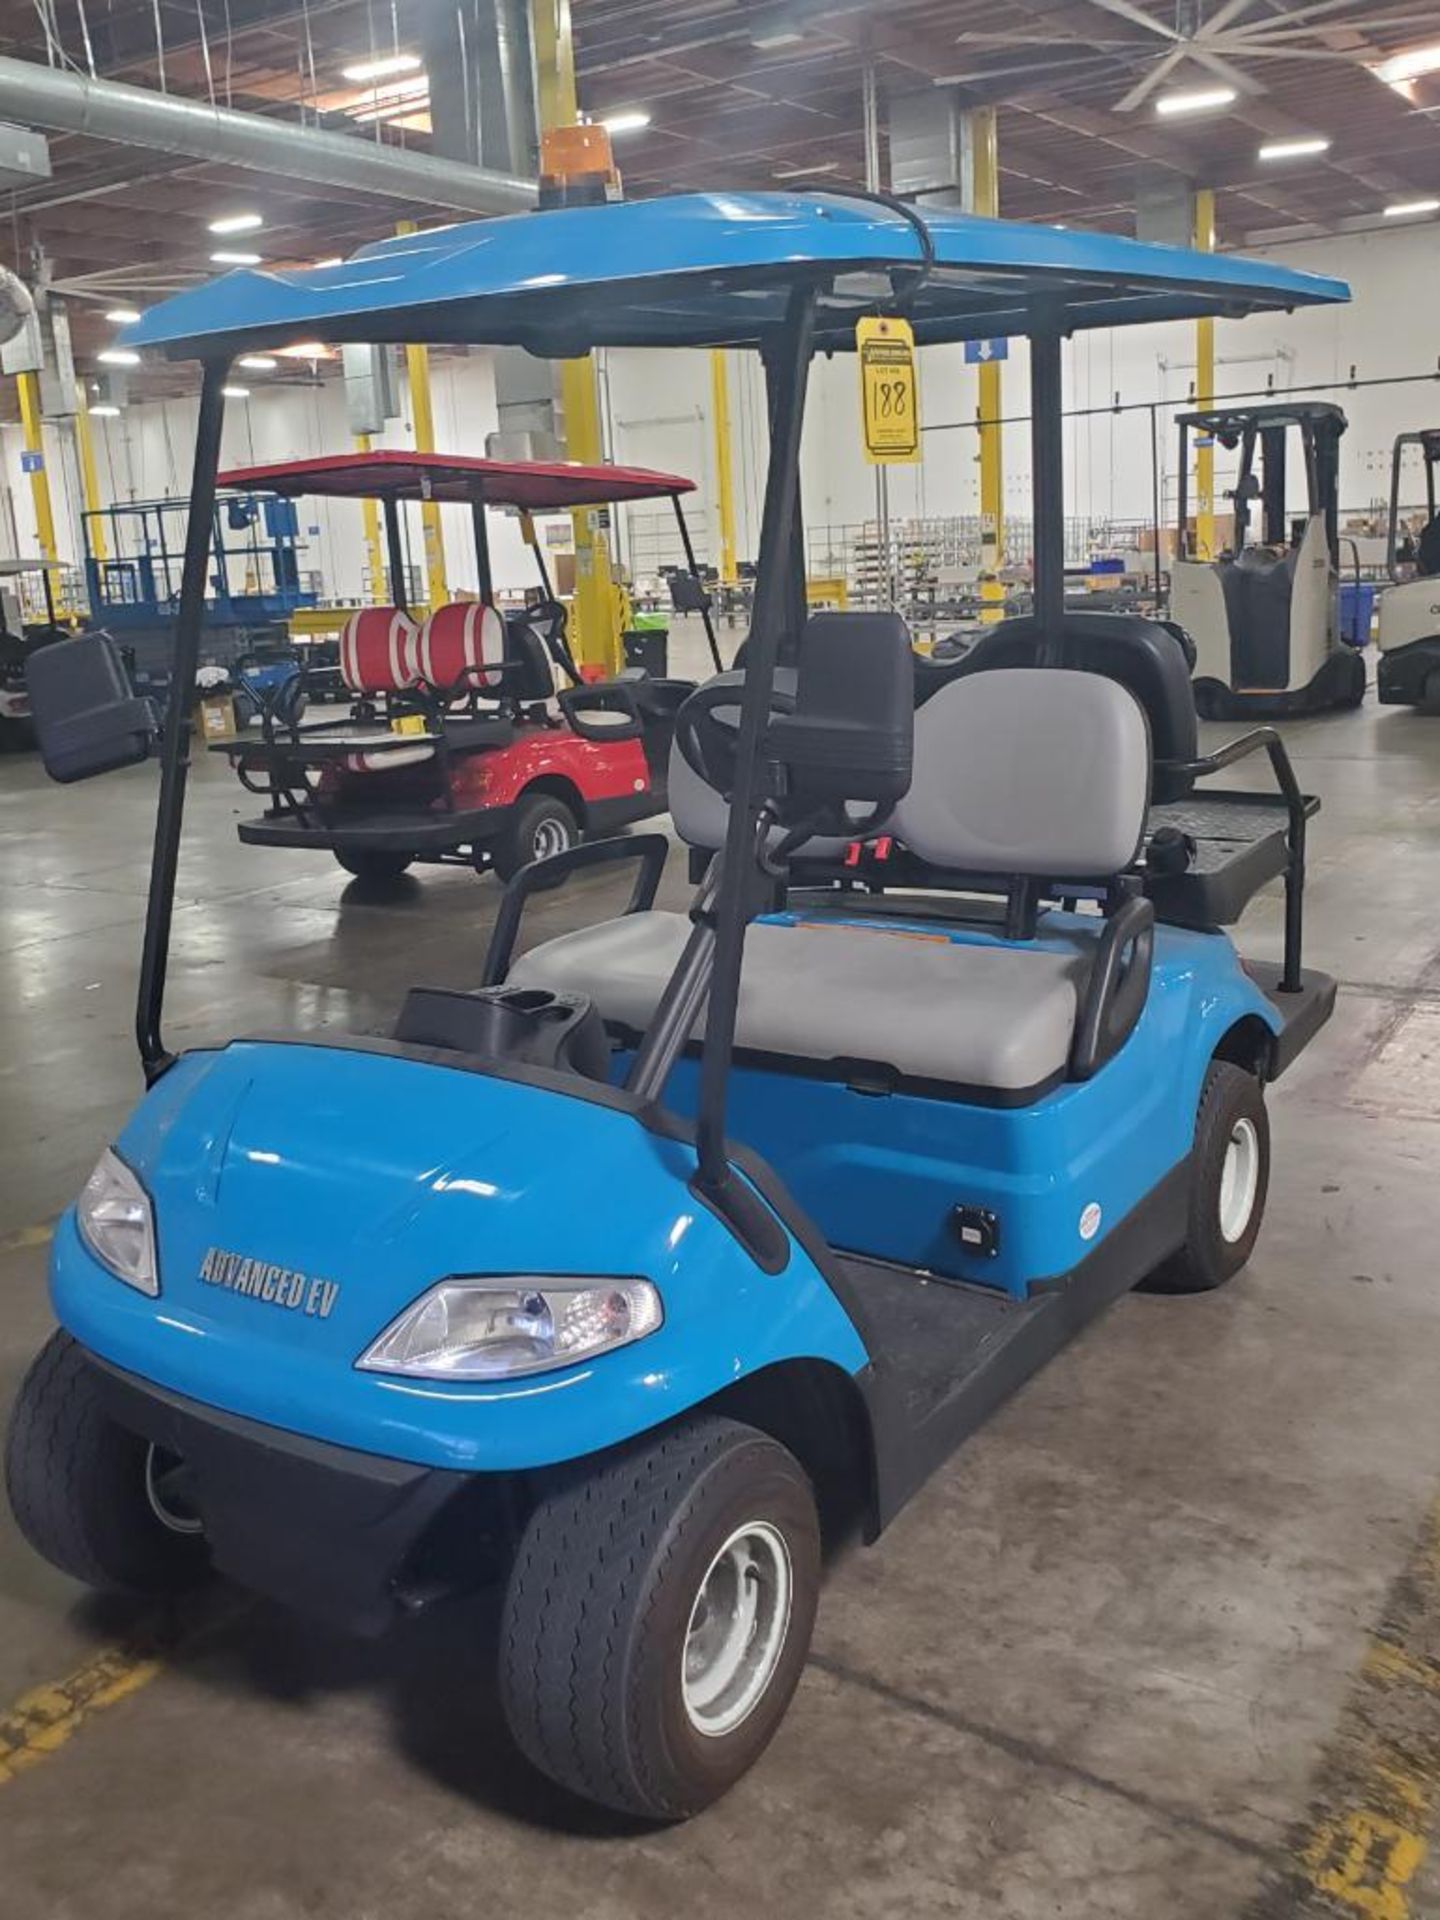 ADVANCED EV ELECTRIC GOLF CART; MODEL LT-A627, 2+2, S/N LTA0025369, RATED SPEED 25-MPH, REAR BENCH S - Image 4 of 8